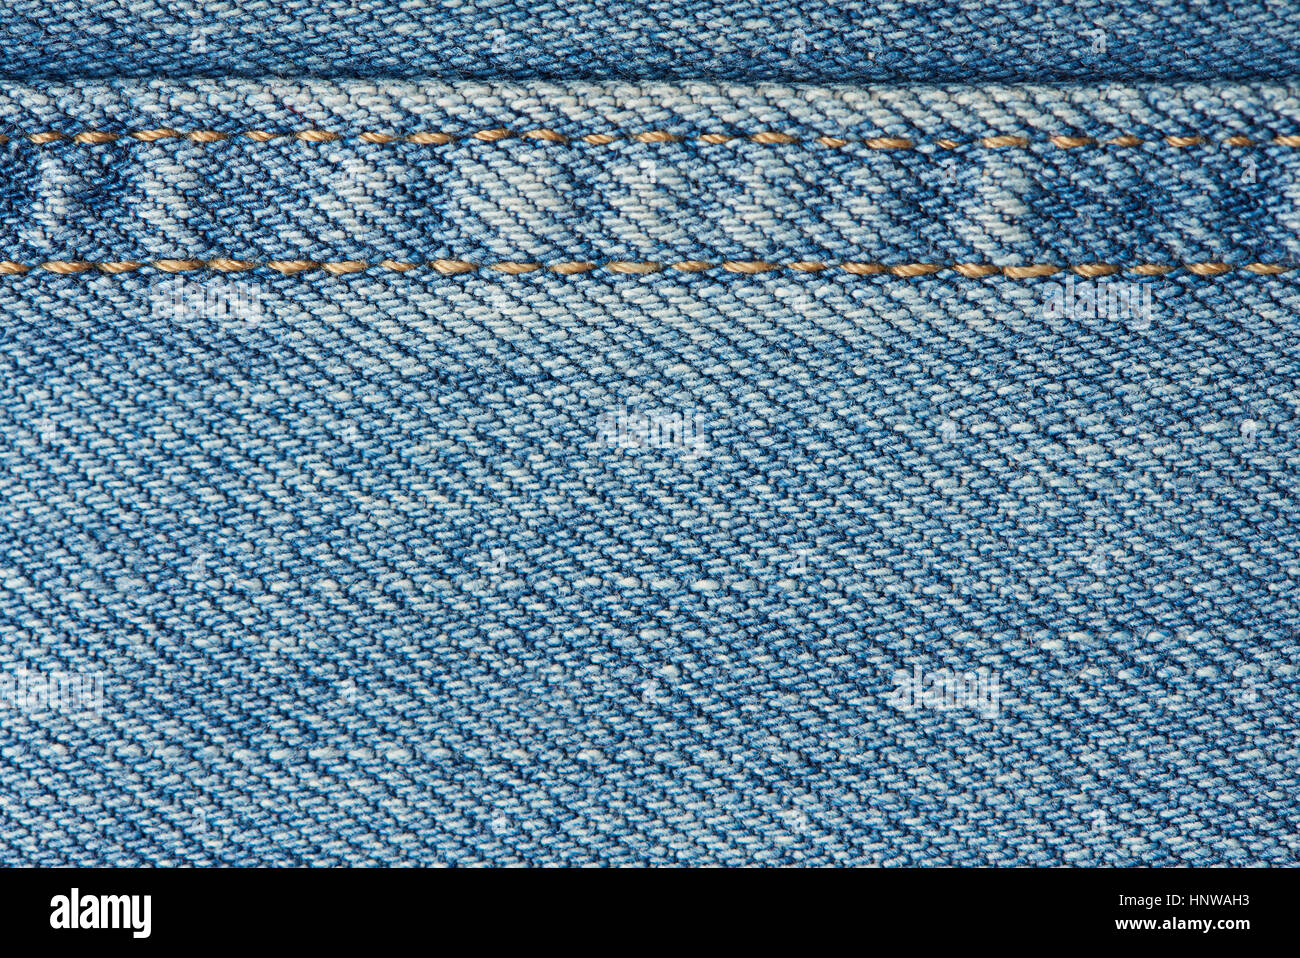 Stitches on light blue jeans background close up Stock Photo